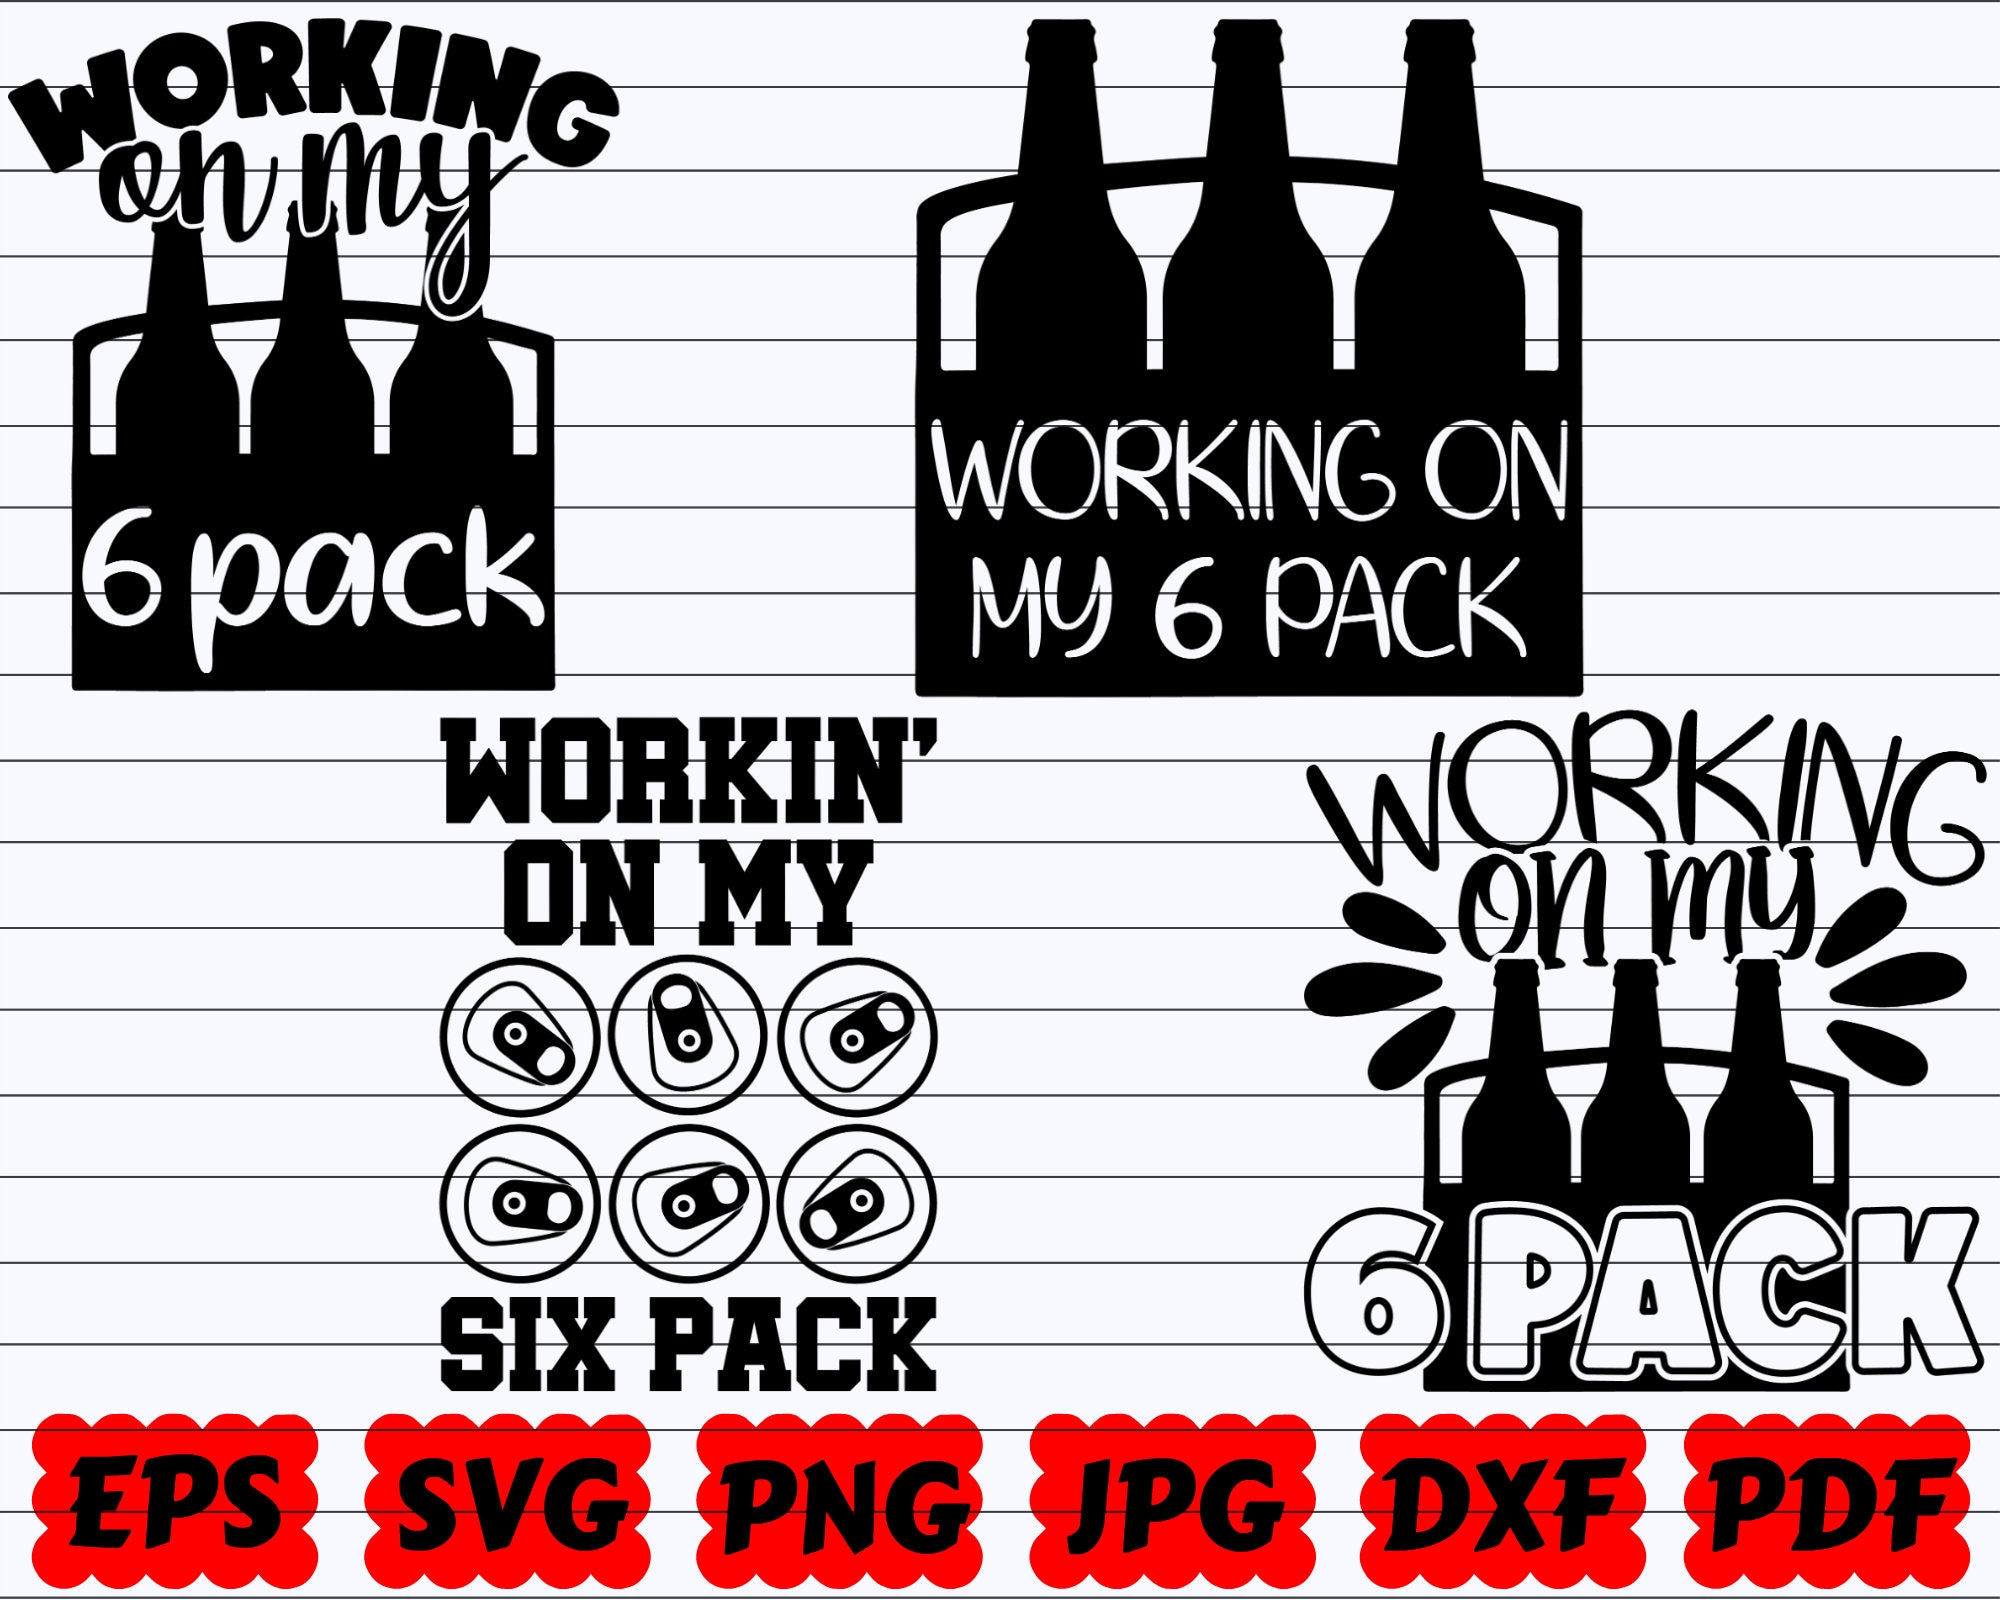 Six Pack Svg - Cut files for Cricut - Silhouette - Vector - Instant Digital  Download - svg, png, jpg, and psd files included!